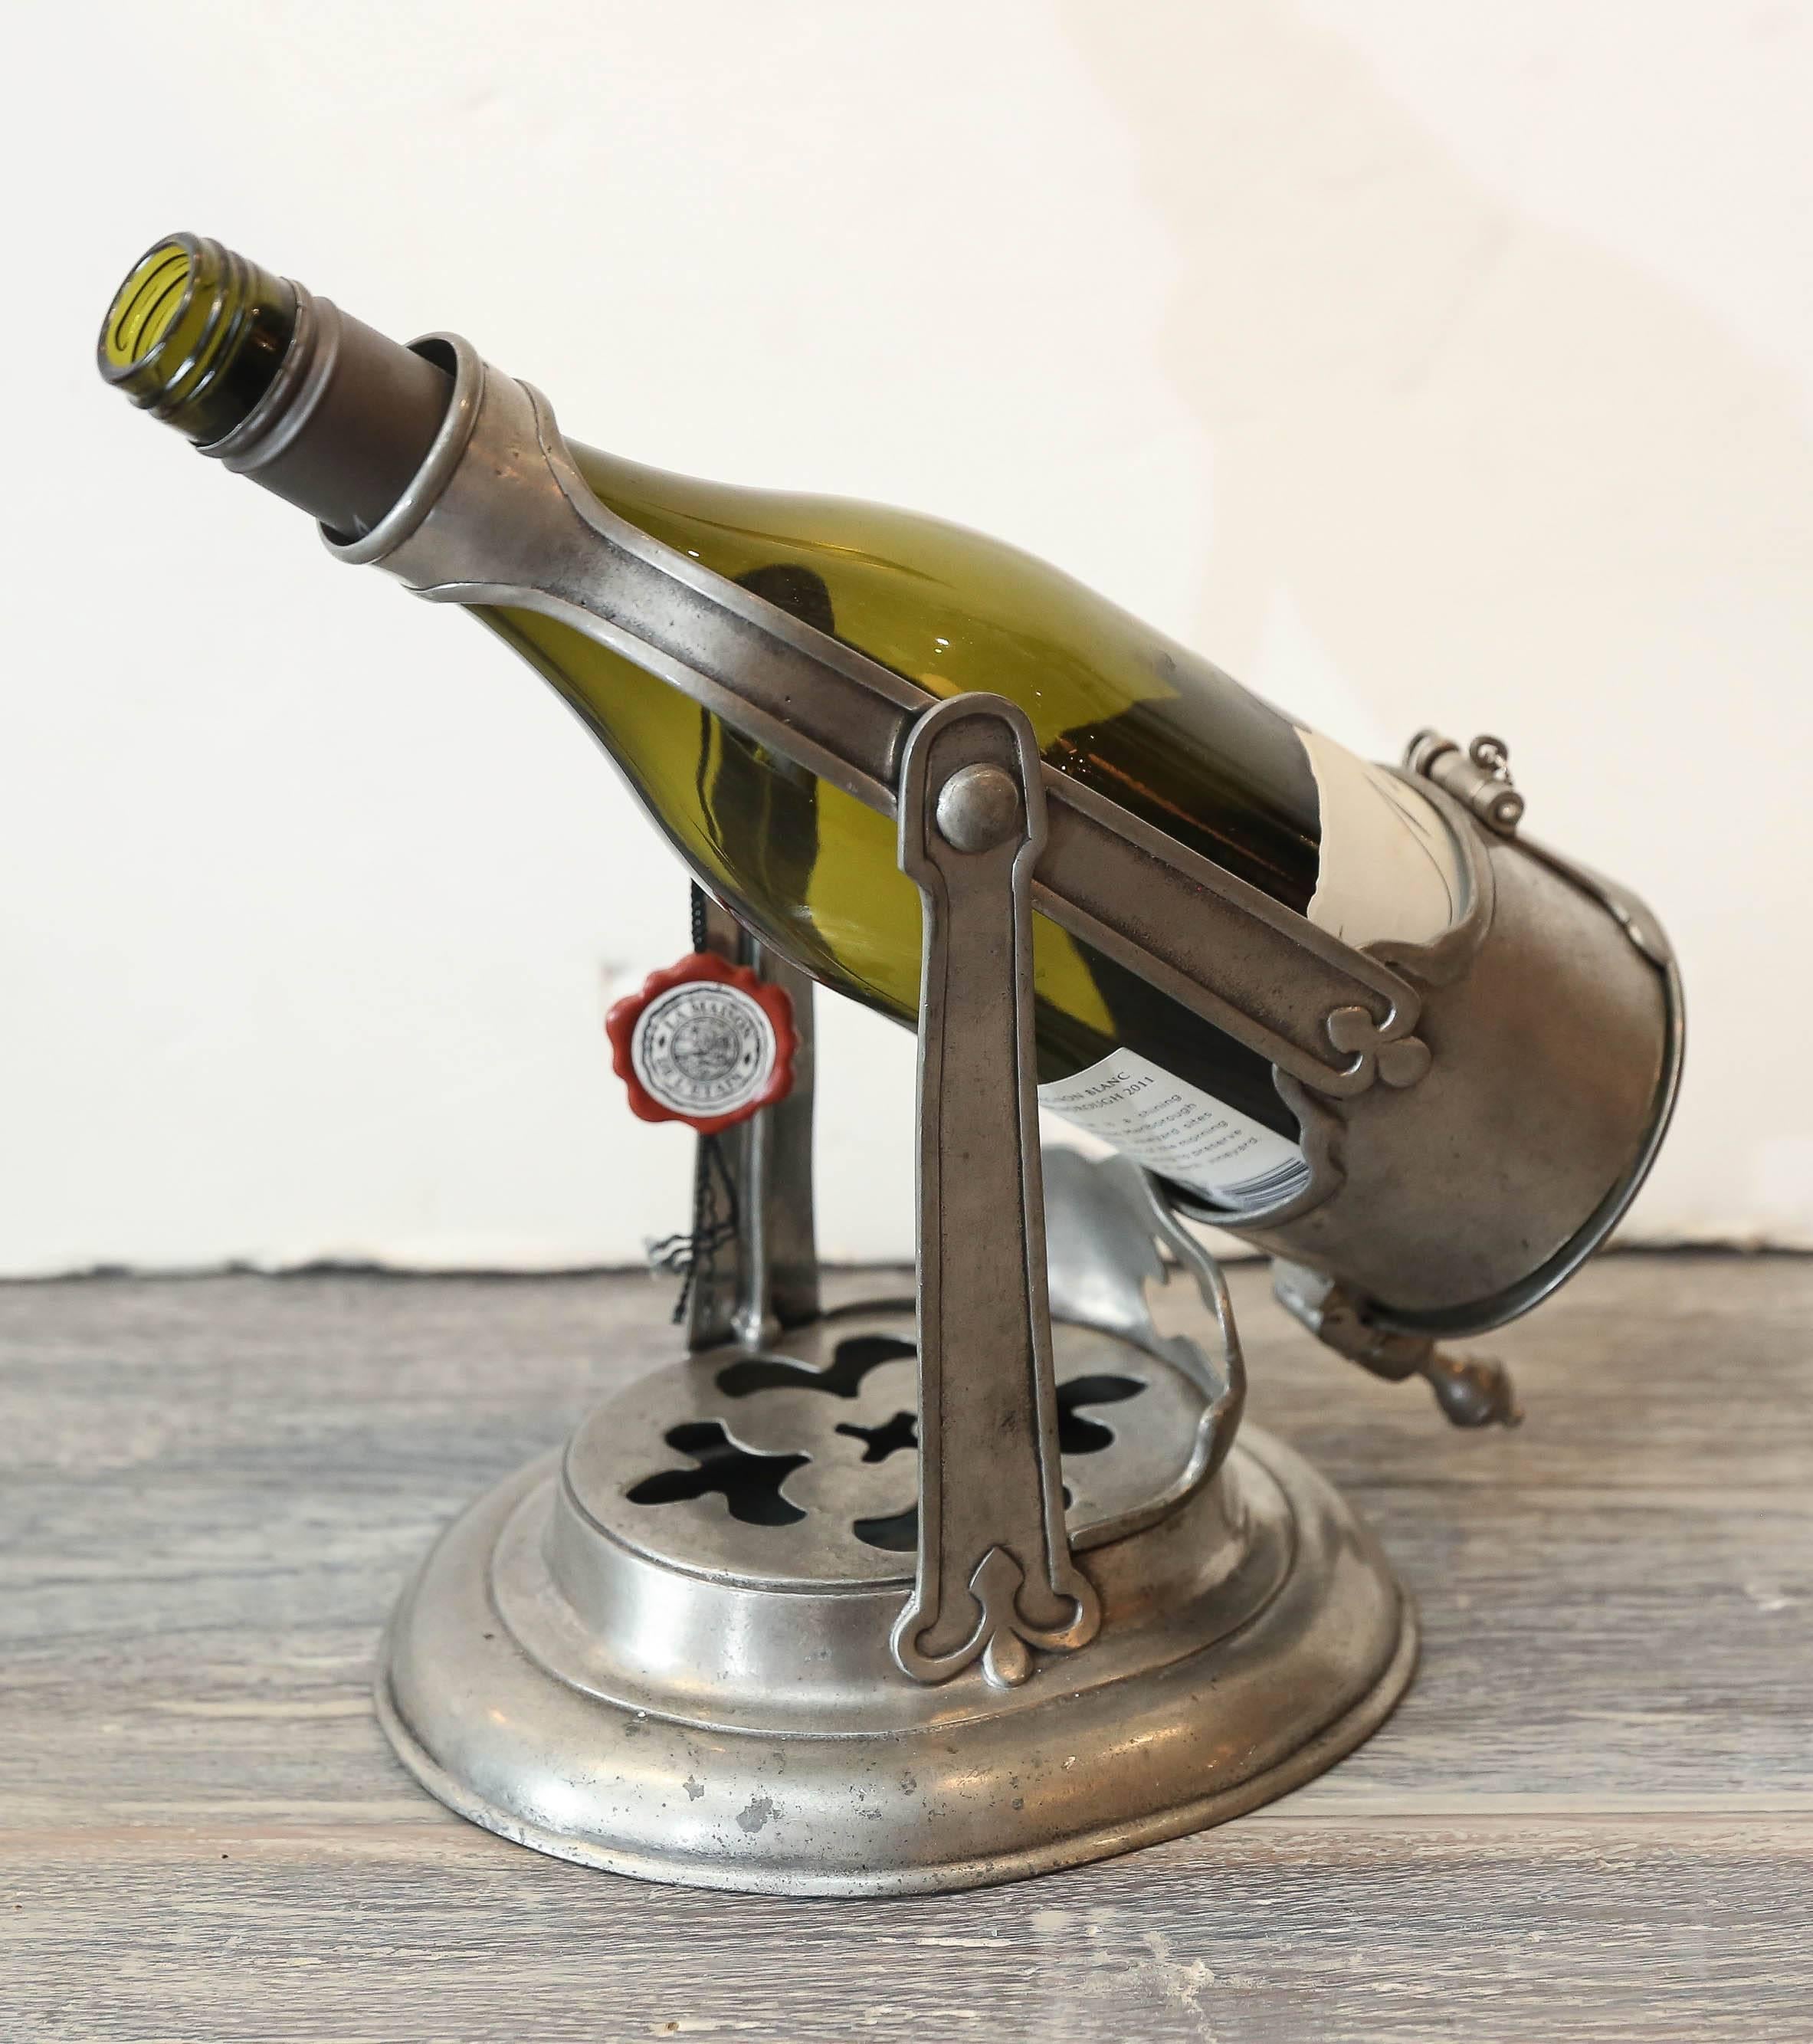 19th and 20th century wine paraphernalia for the wine connoisseur. The items at either end as sold as a pair and the middle item is sold individually.  Furthest right piece has been sold.